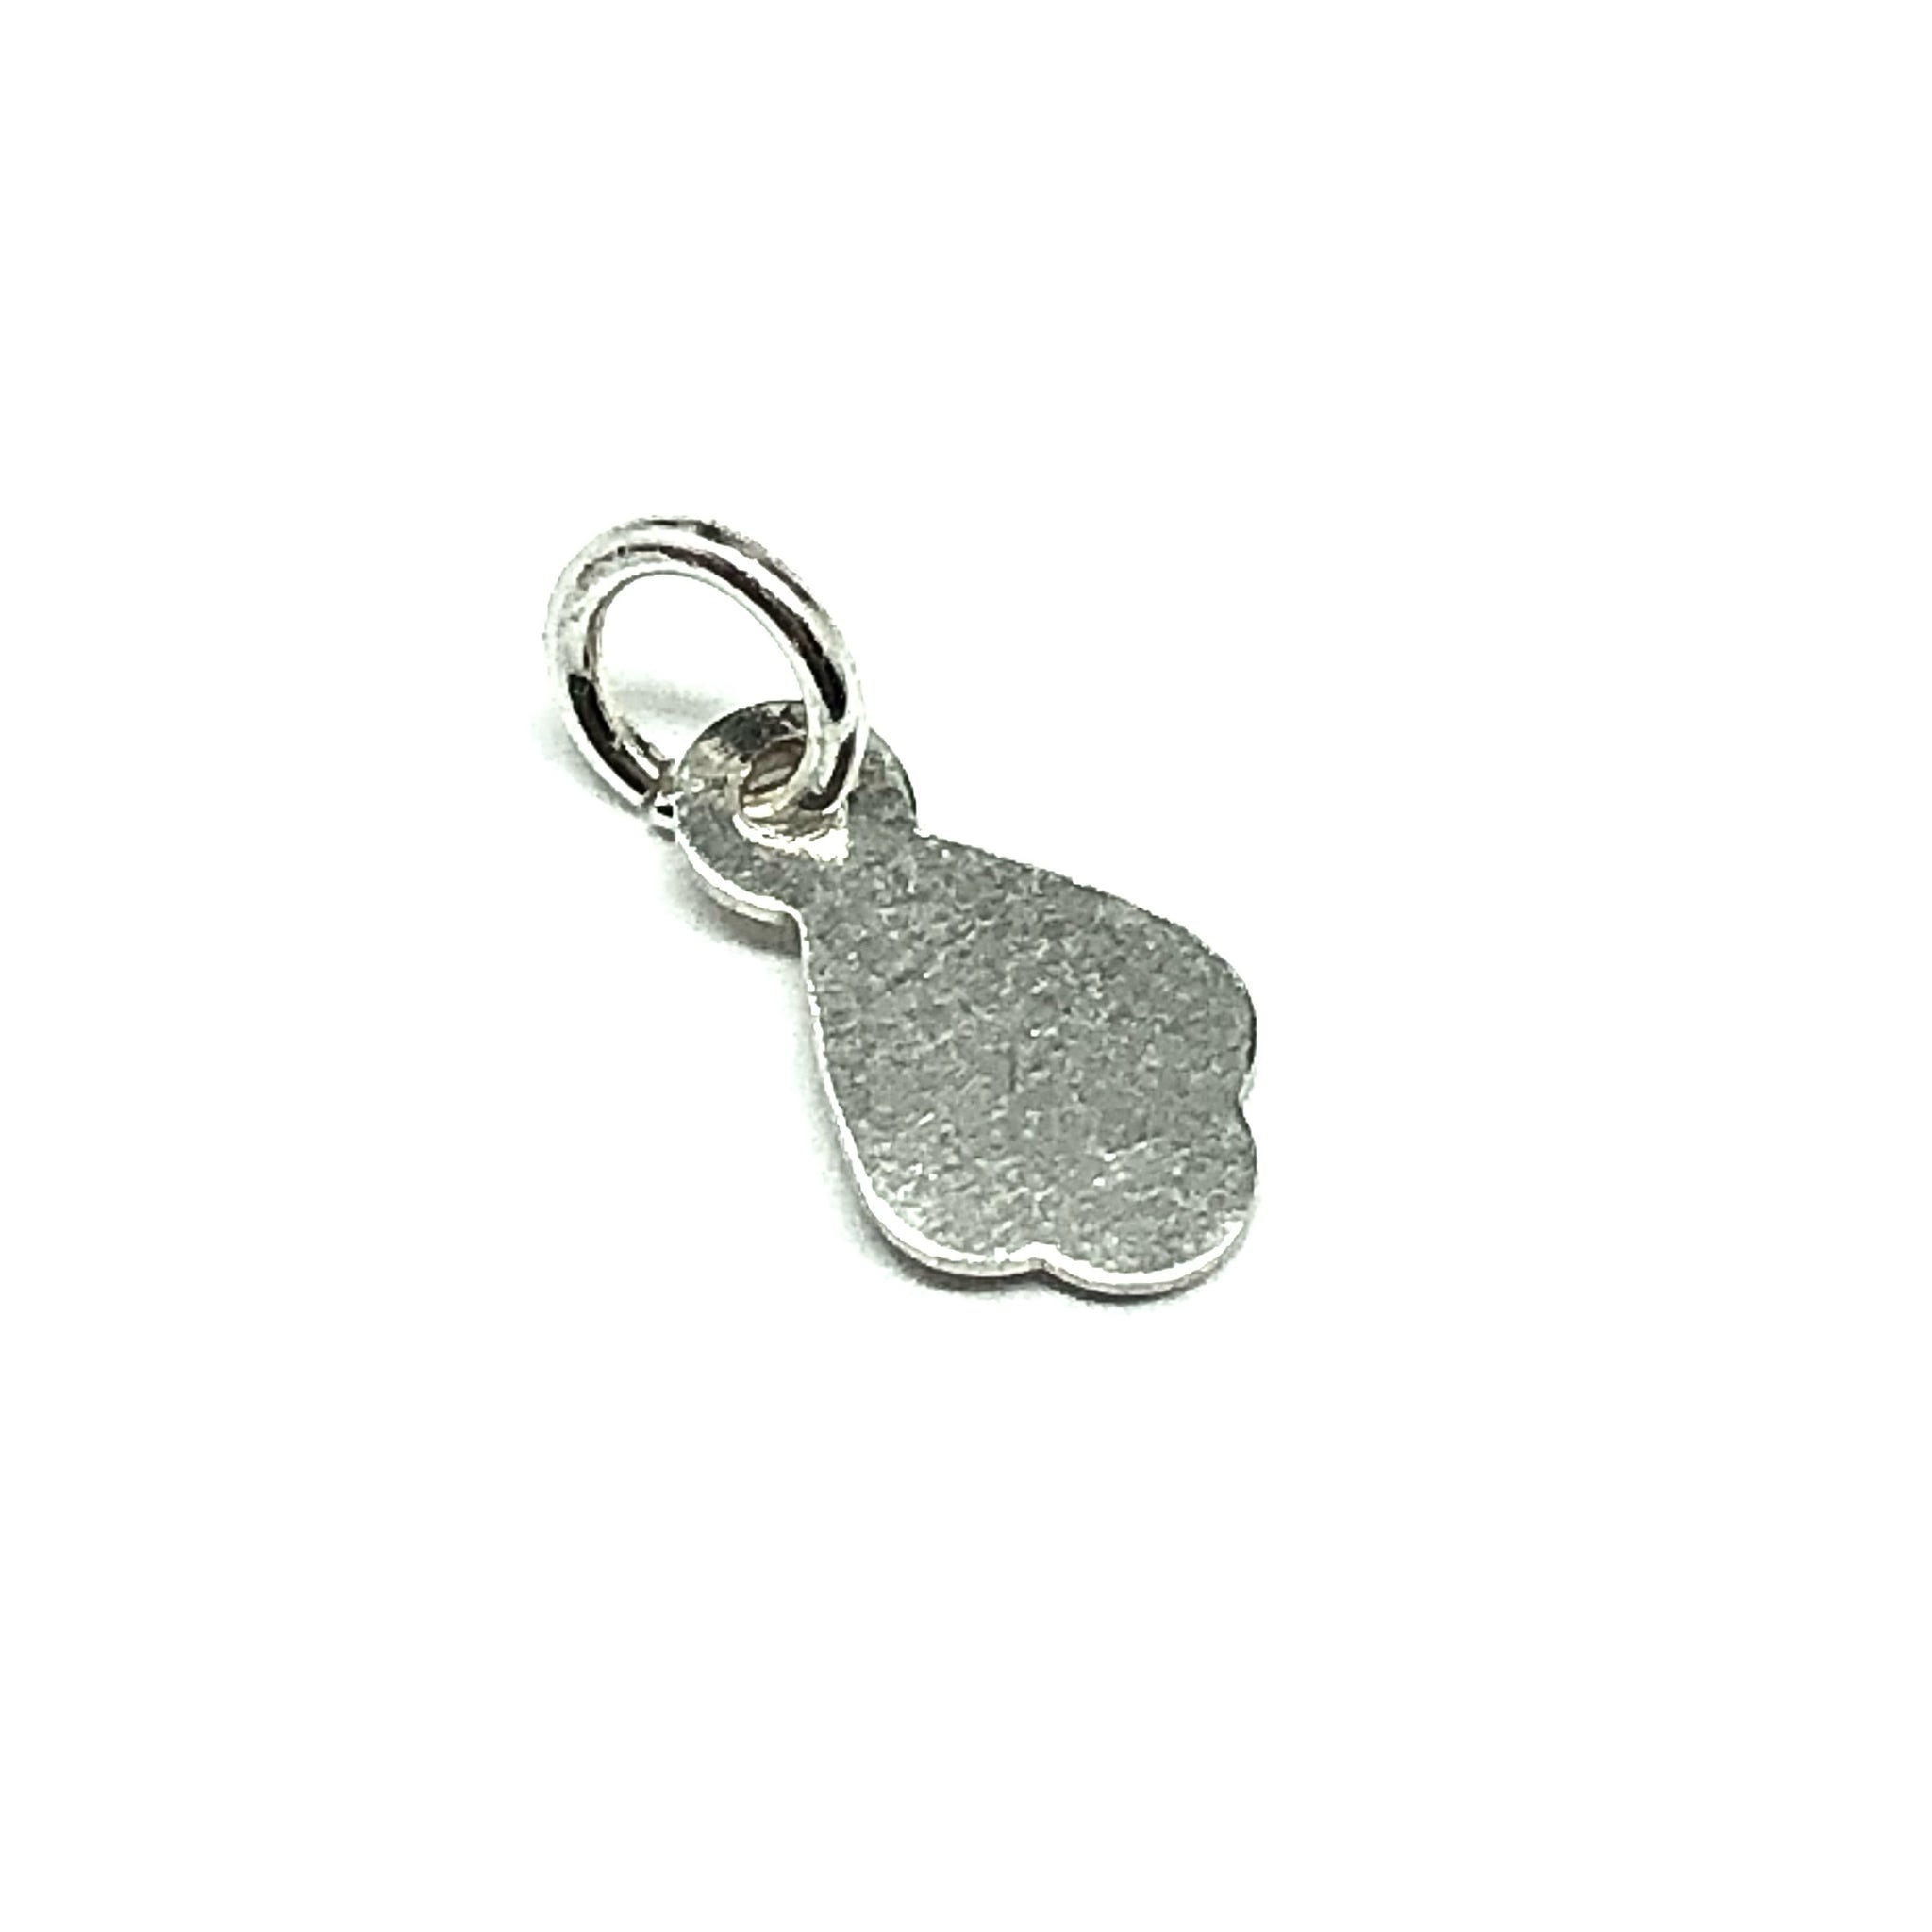 Zipper Pull Repair Charm - Rustic Graphite Heart Zipper Charm for Repair /  Decorative anything it can clip onto! – Blingschlingers Jewelry